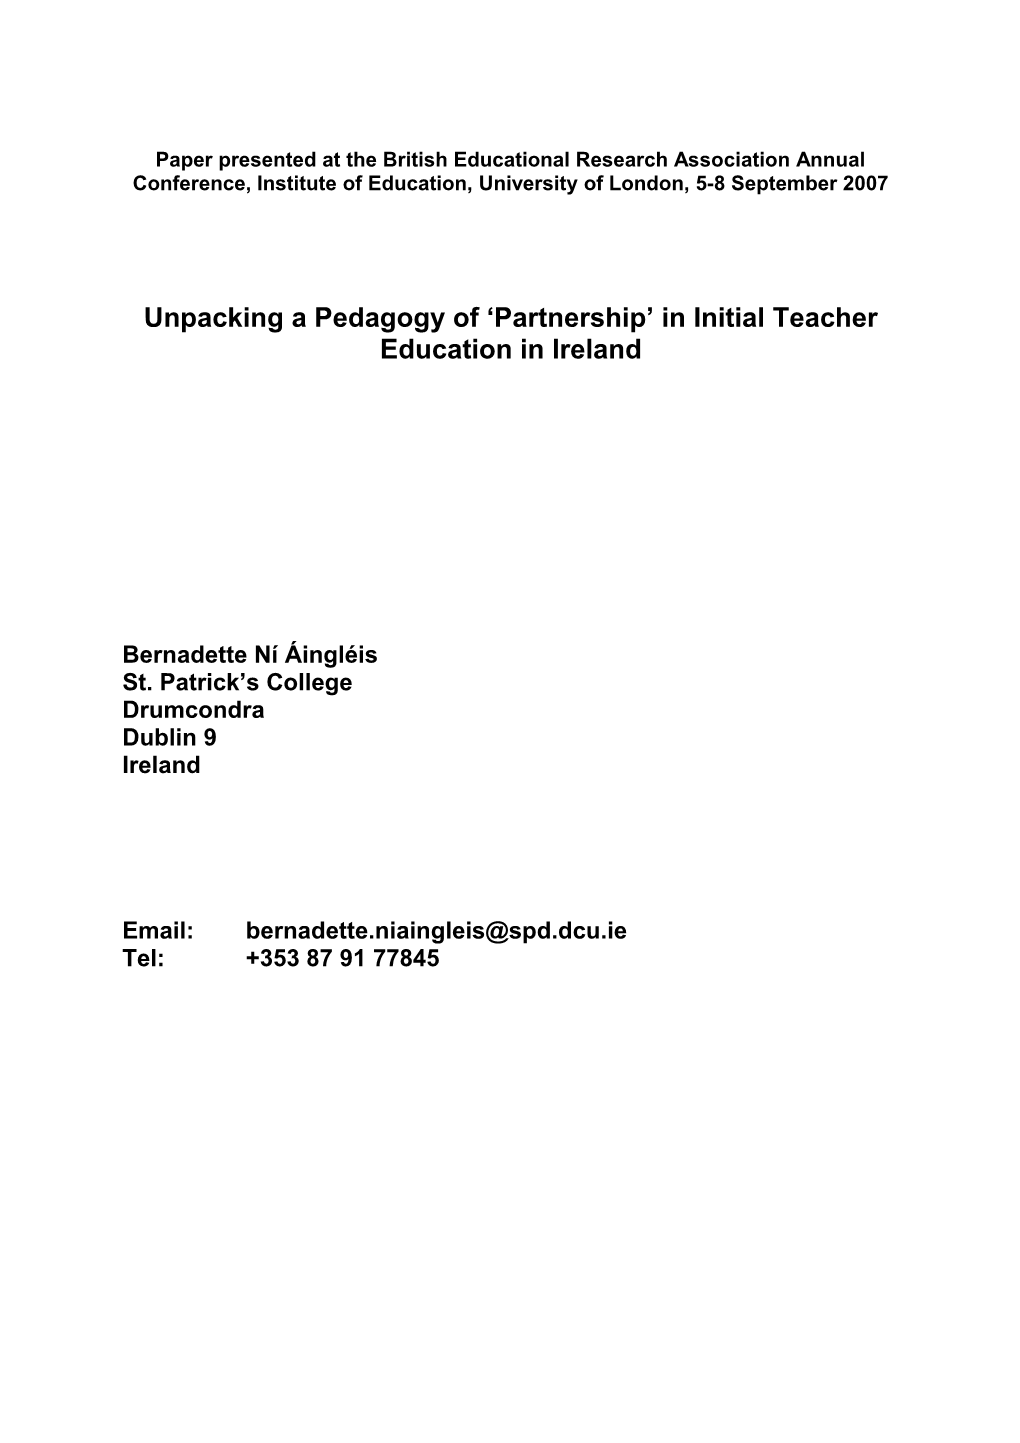 Unpacking a Pedagogy of Partnership in Initial Teacher Education in Southern Ireland